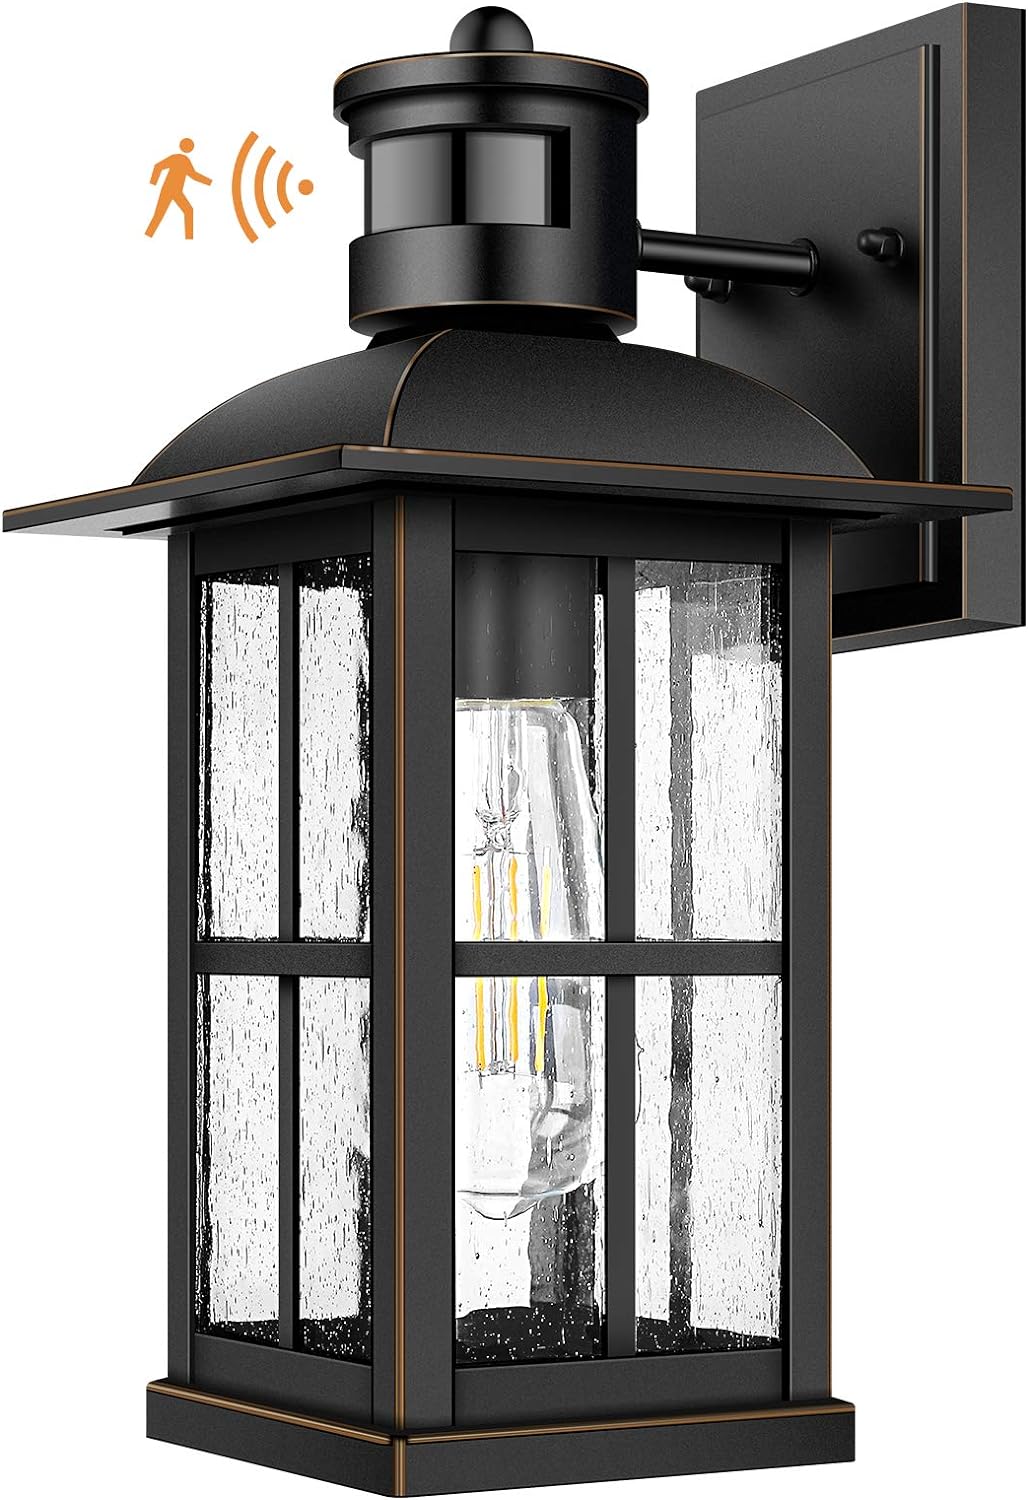 100% Anti-Rust Aluminum Matte Black Wall Sconce with Clear Glass for Doorway Bulbs not Included Waterproof Porch Light Exterior Light Fixture Wall Mount 2-Pack Dusk to Dawn Outdoor Wall Lantern